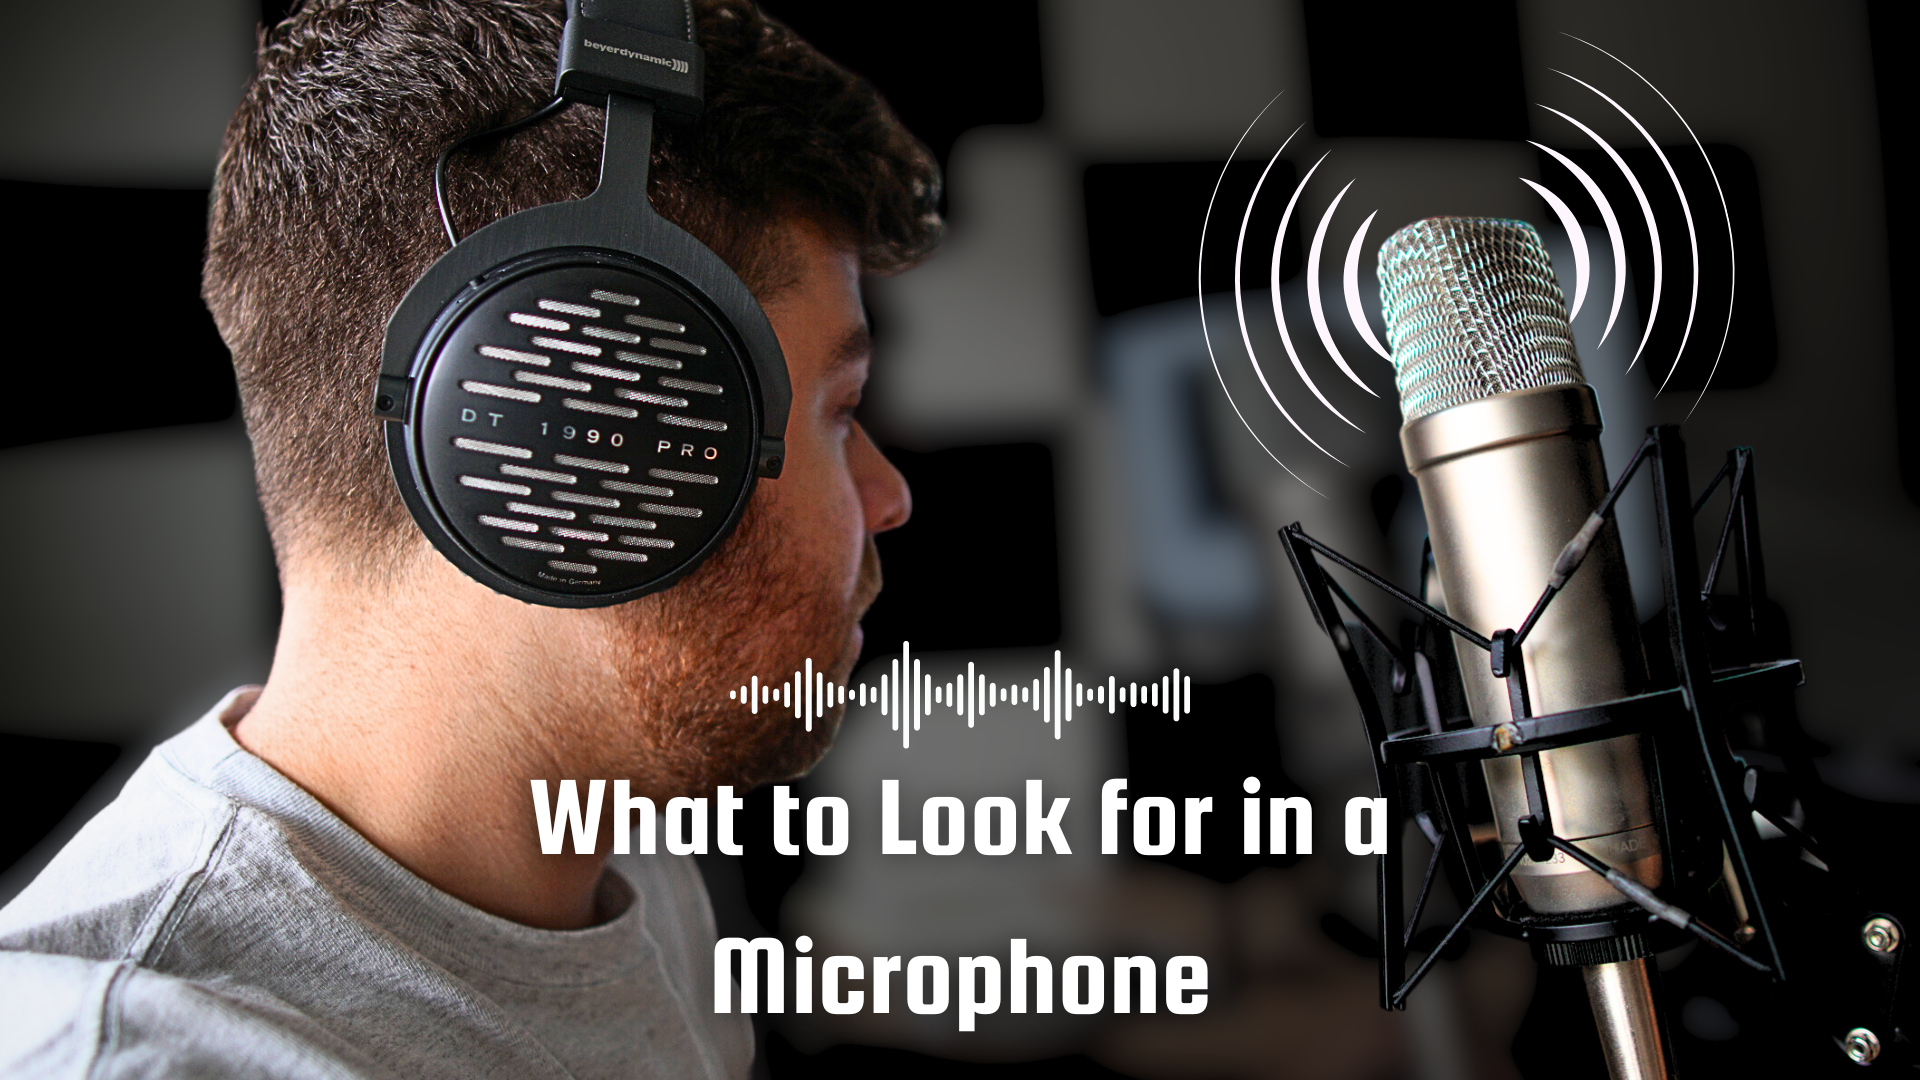 What to Look for in a Microphone